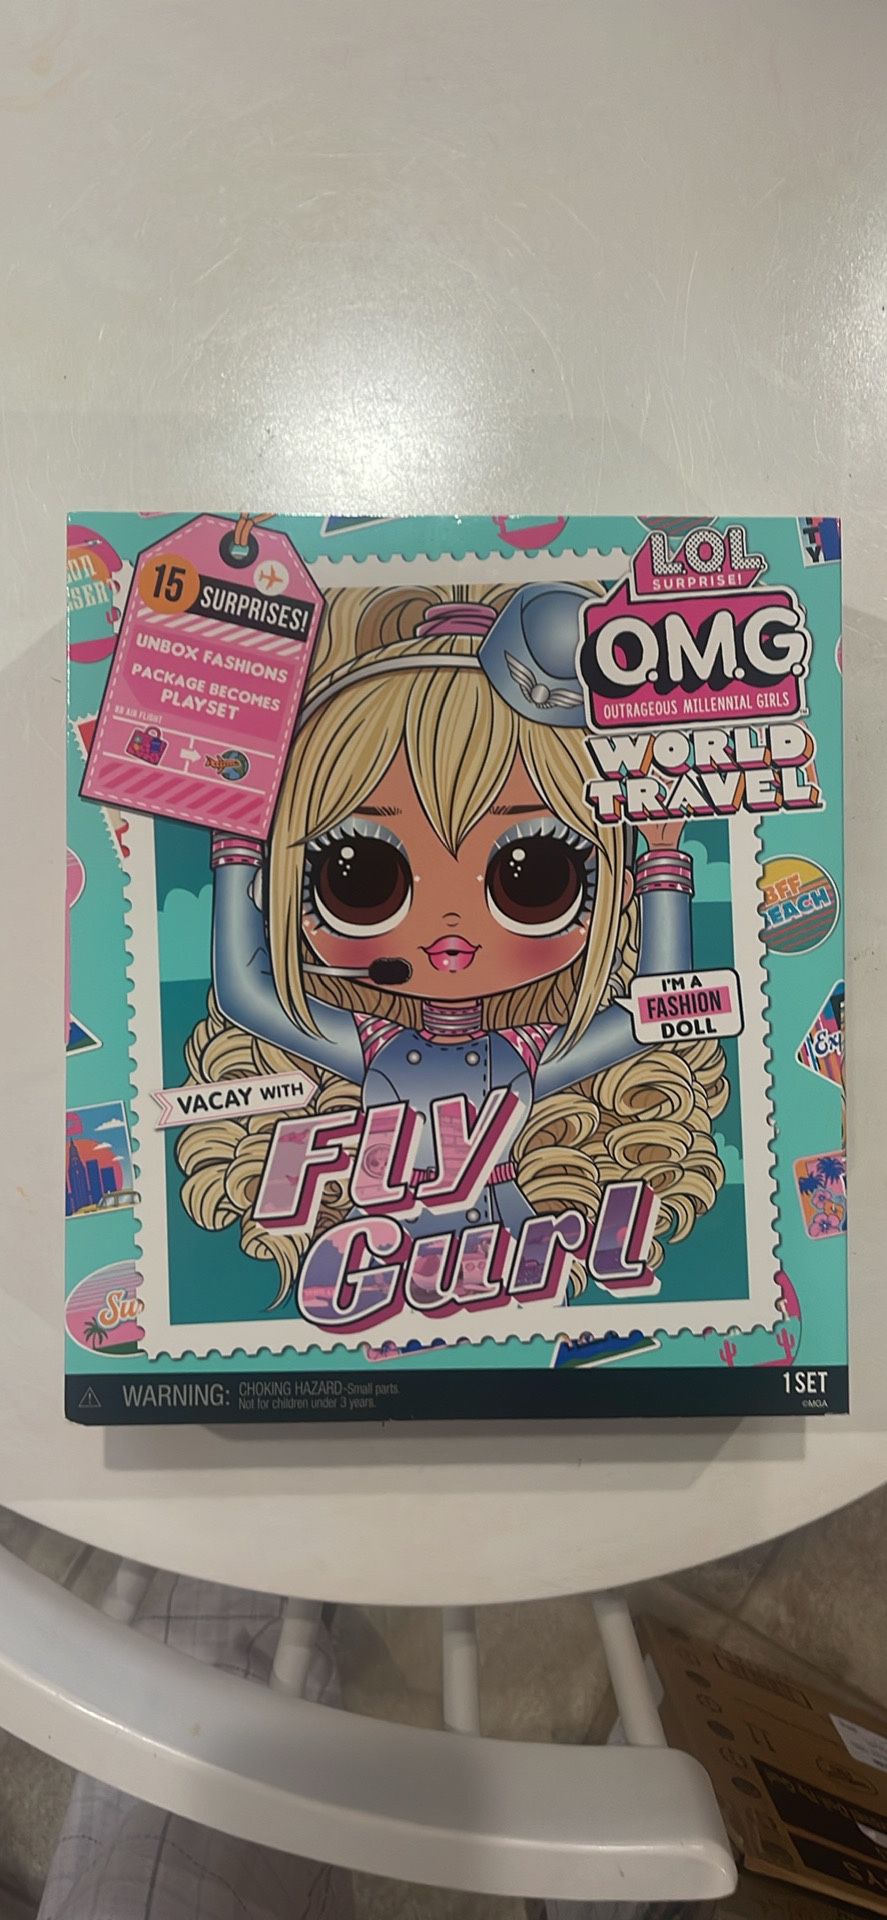 L.O.L. Surprise! World Travel™ Fly Gurl Fashion Doll with 15 Surprises Including Fashion Outfit, Accessorie